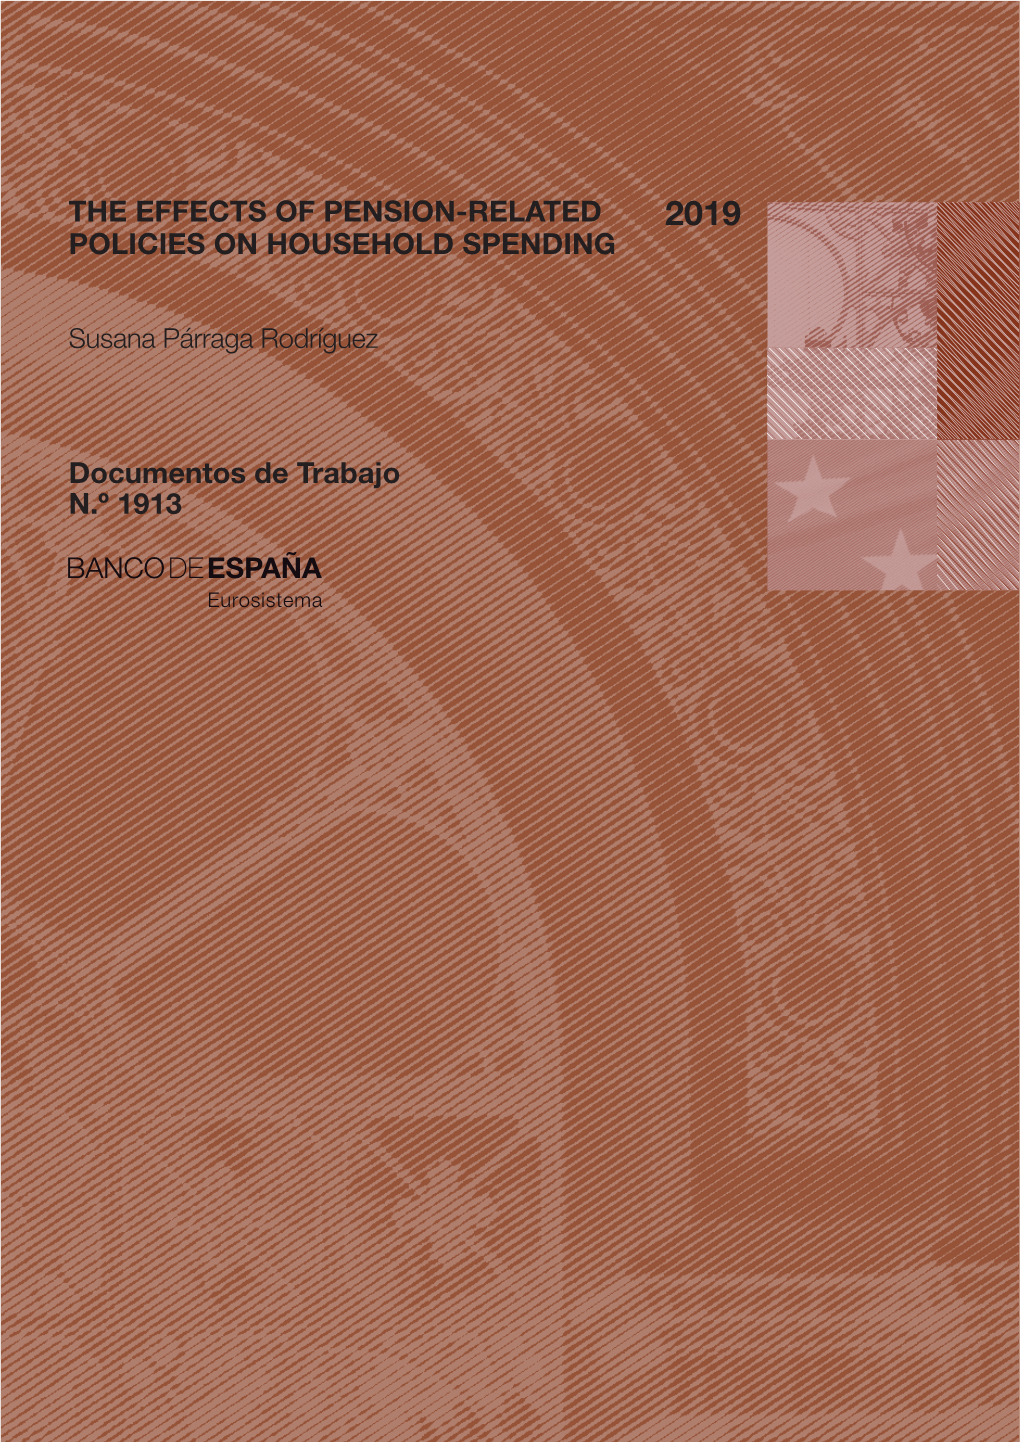 The Effects of Pension-Related Policies on Household Spending the Effects of Pension-Related Policies on Household Spending